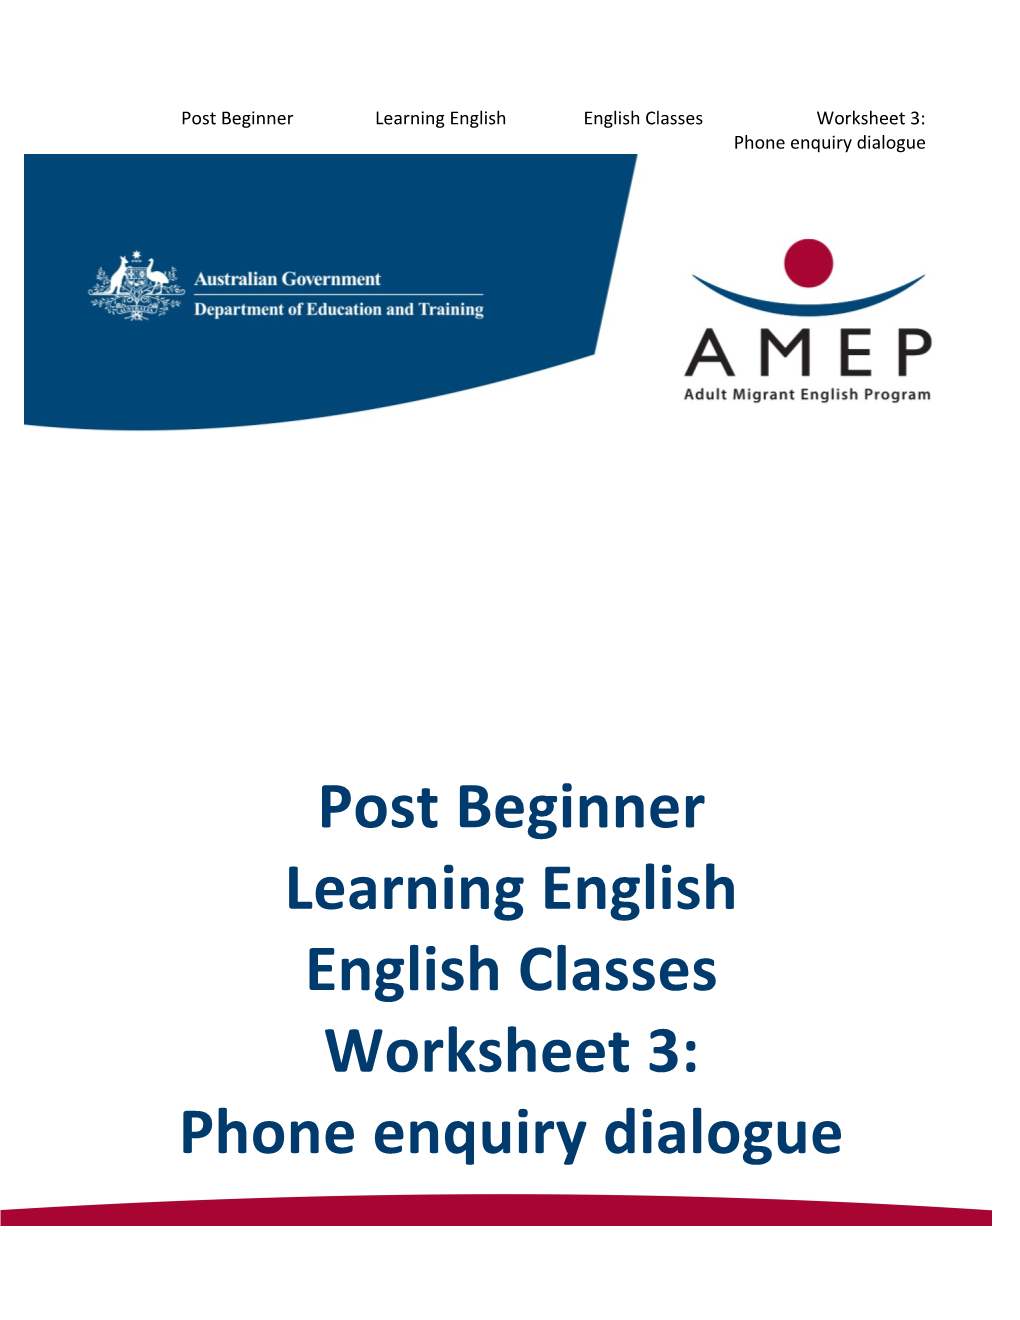 Post Beginner Learning English English Classes Worksheet 3: Phone Enquiry Dialogue